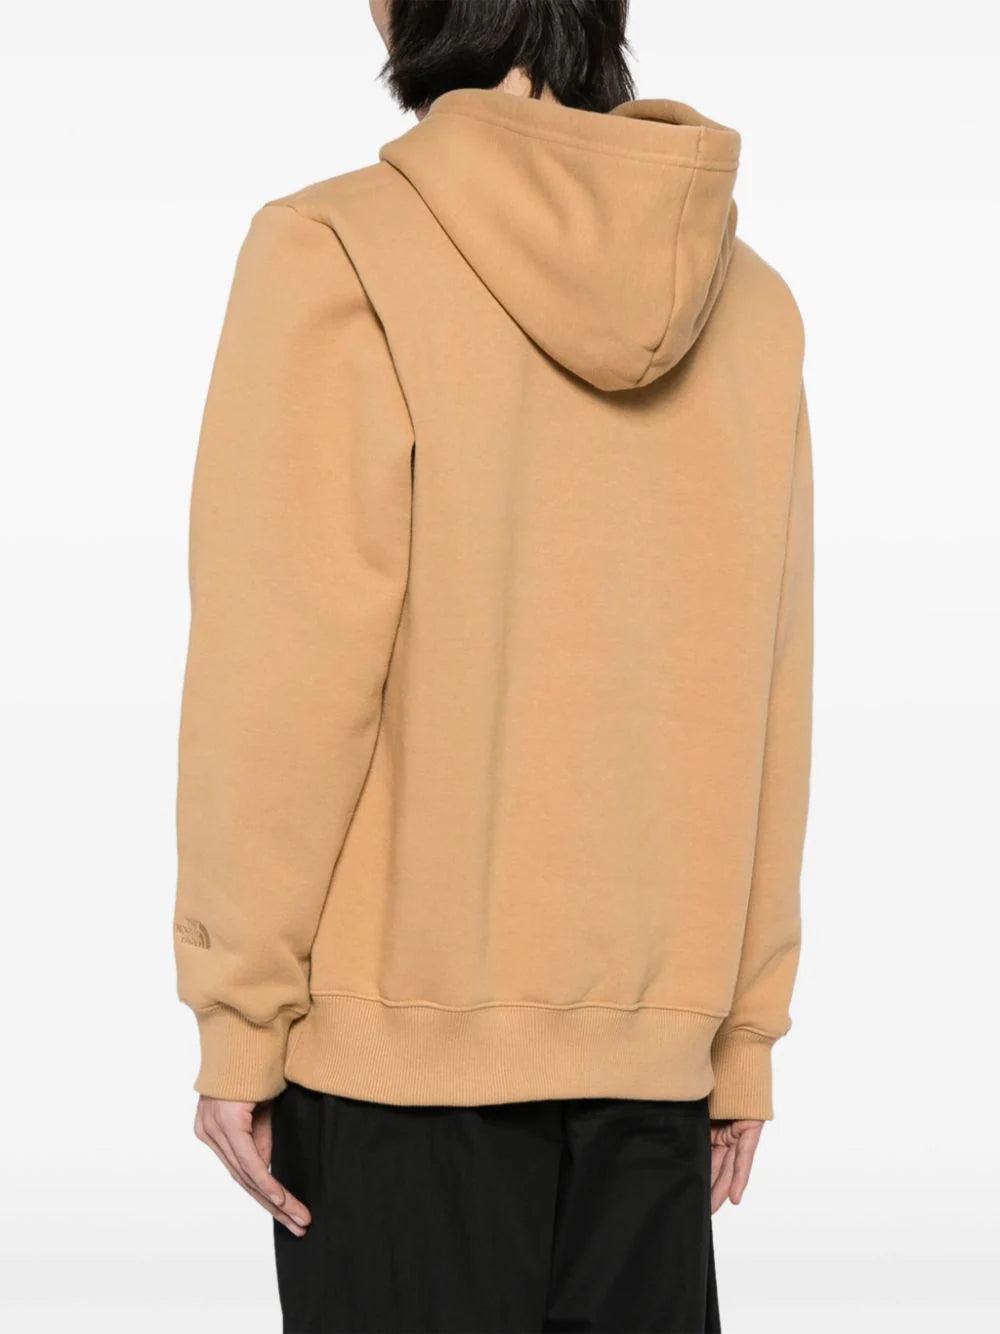 THE NORTH FACE Men Heavyweight Hoodie